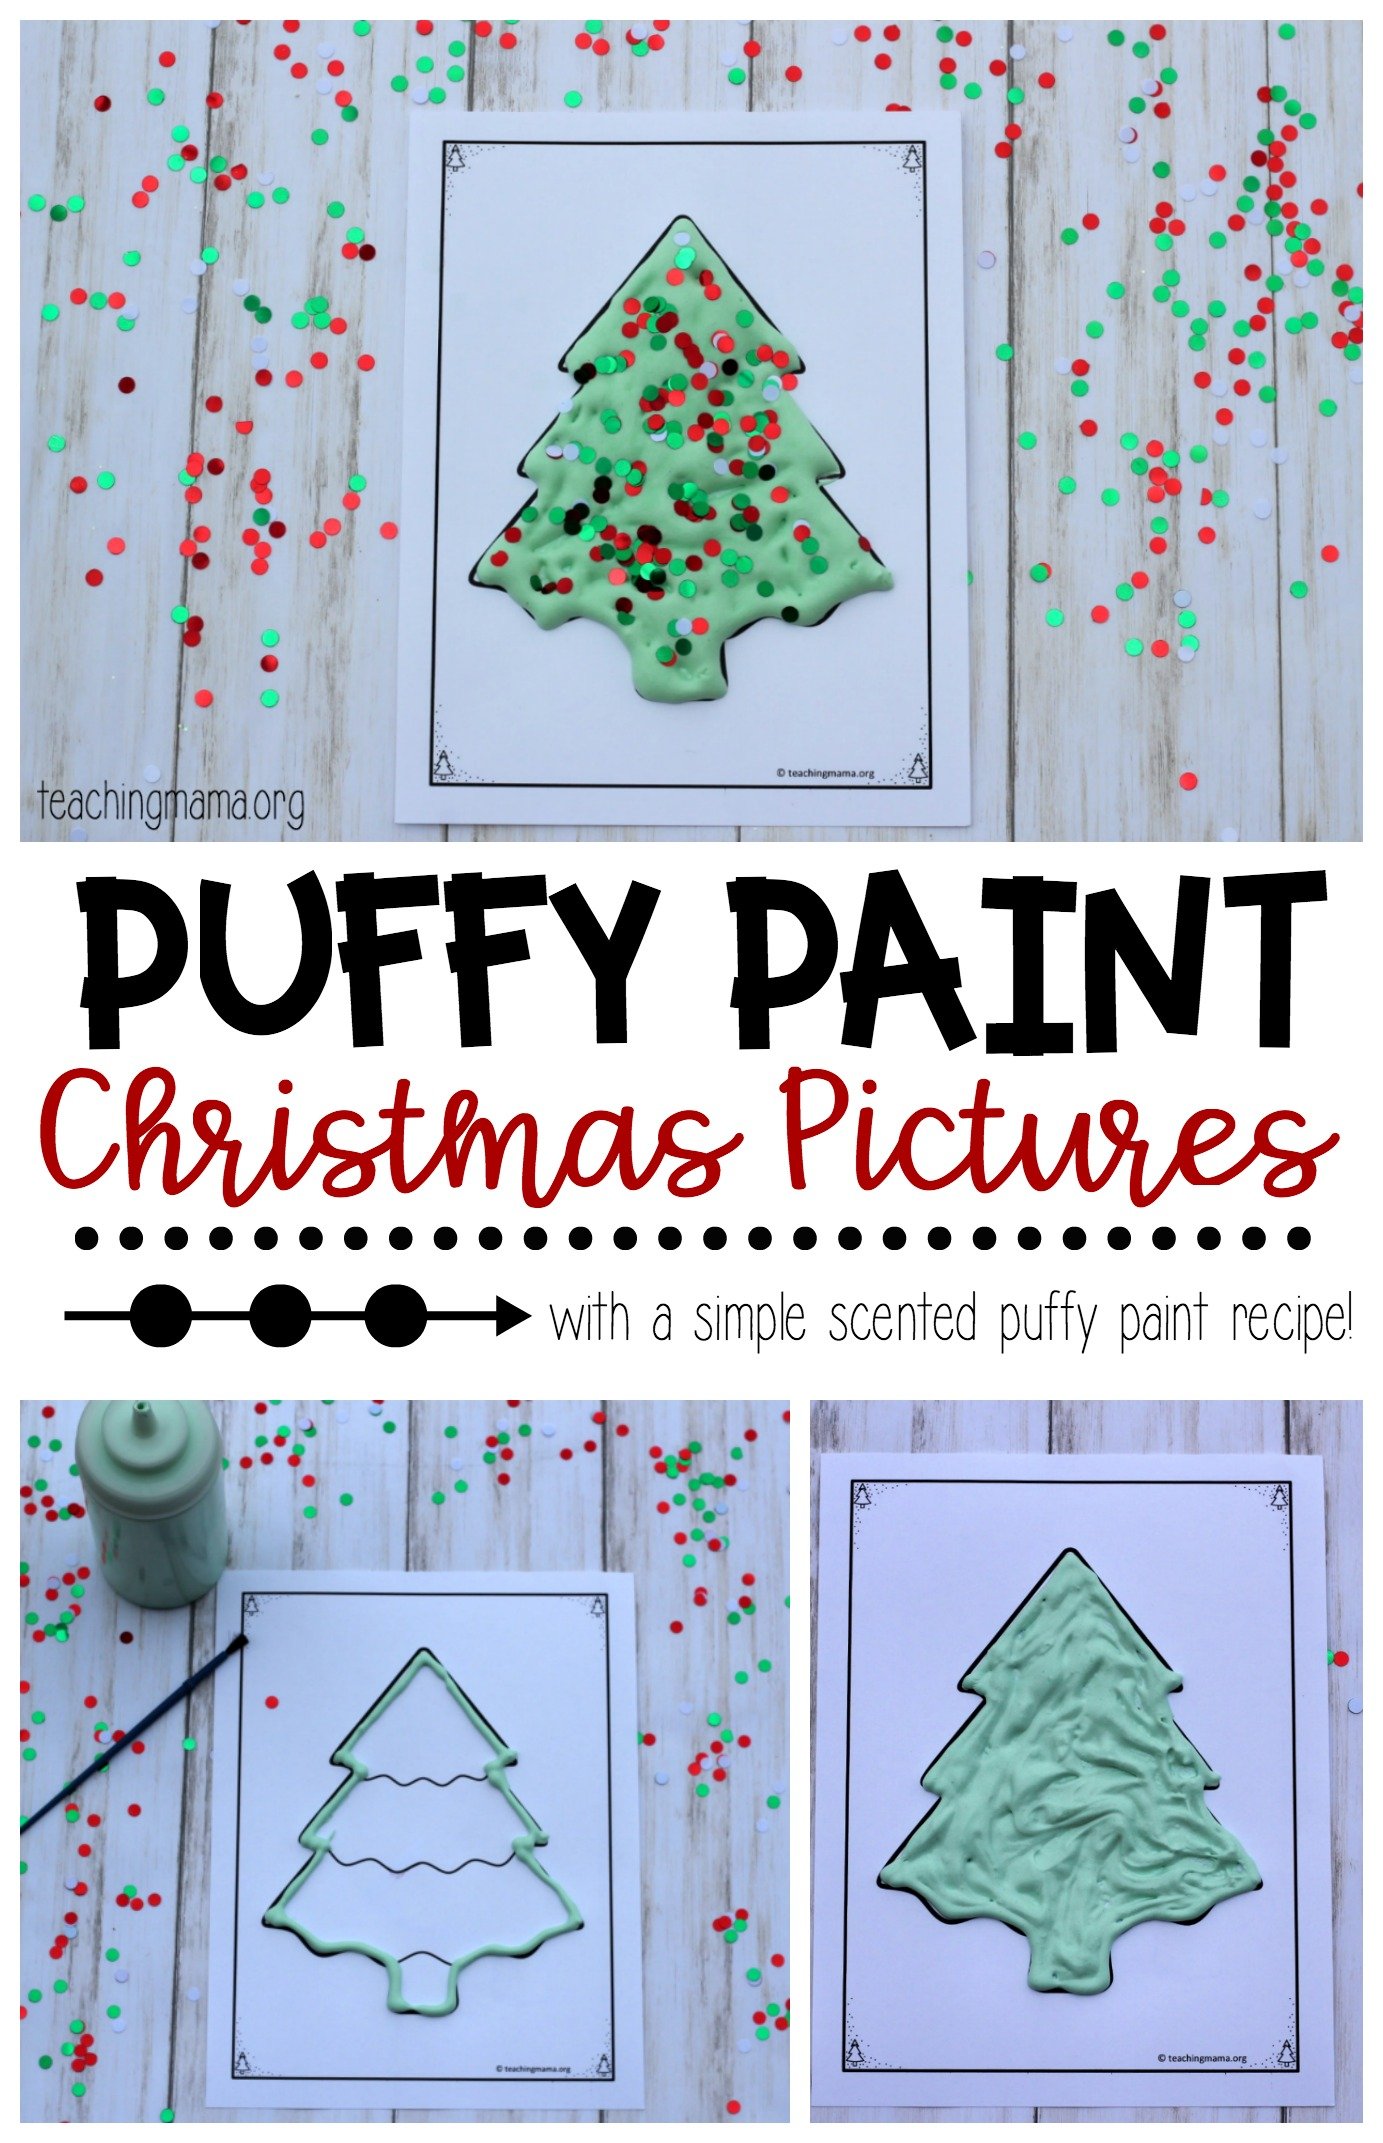 Puffy Paint Christmas Pictures